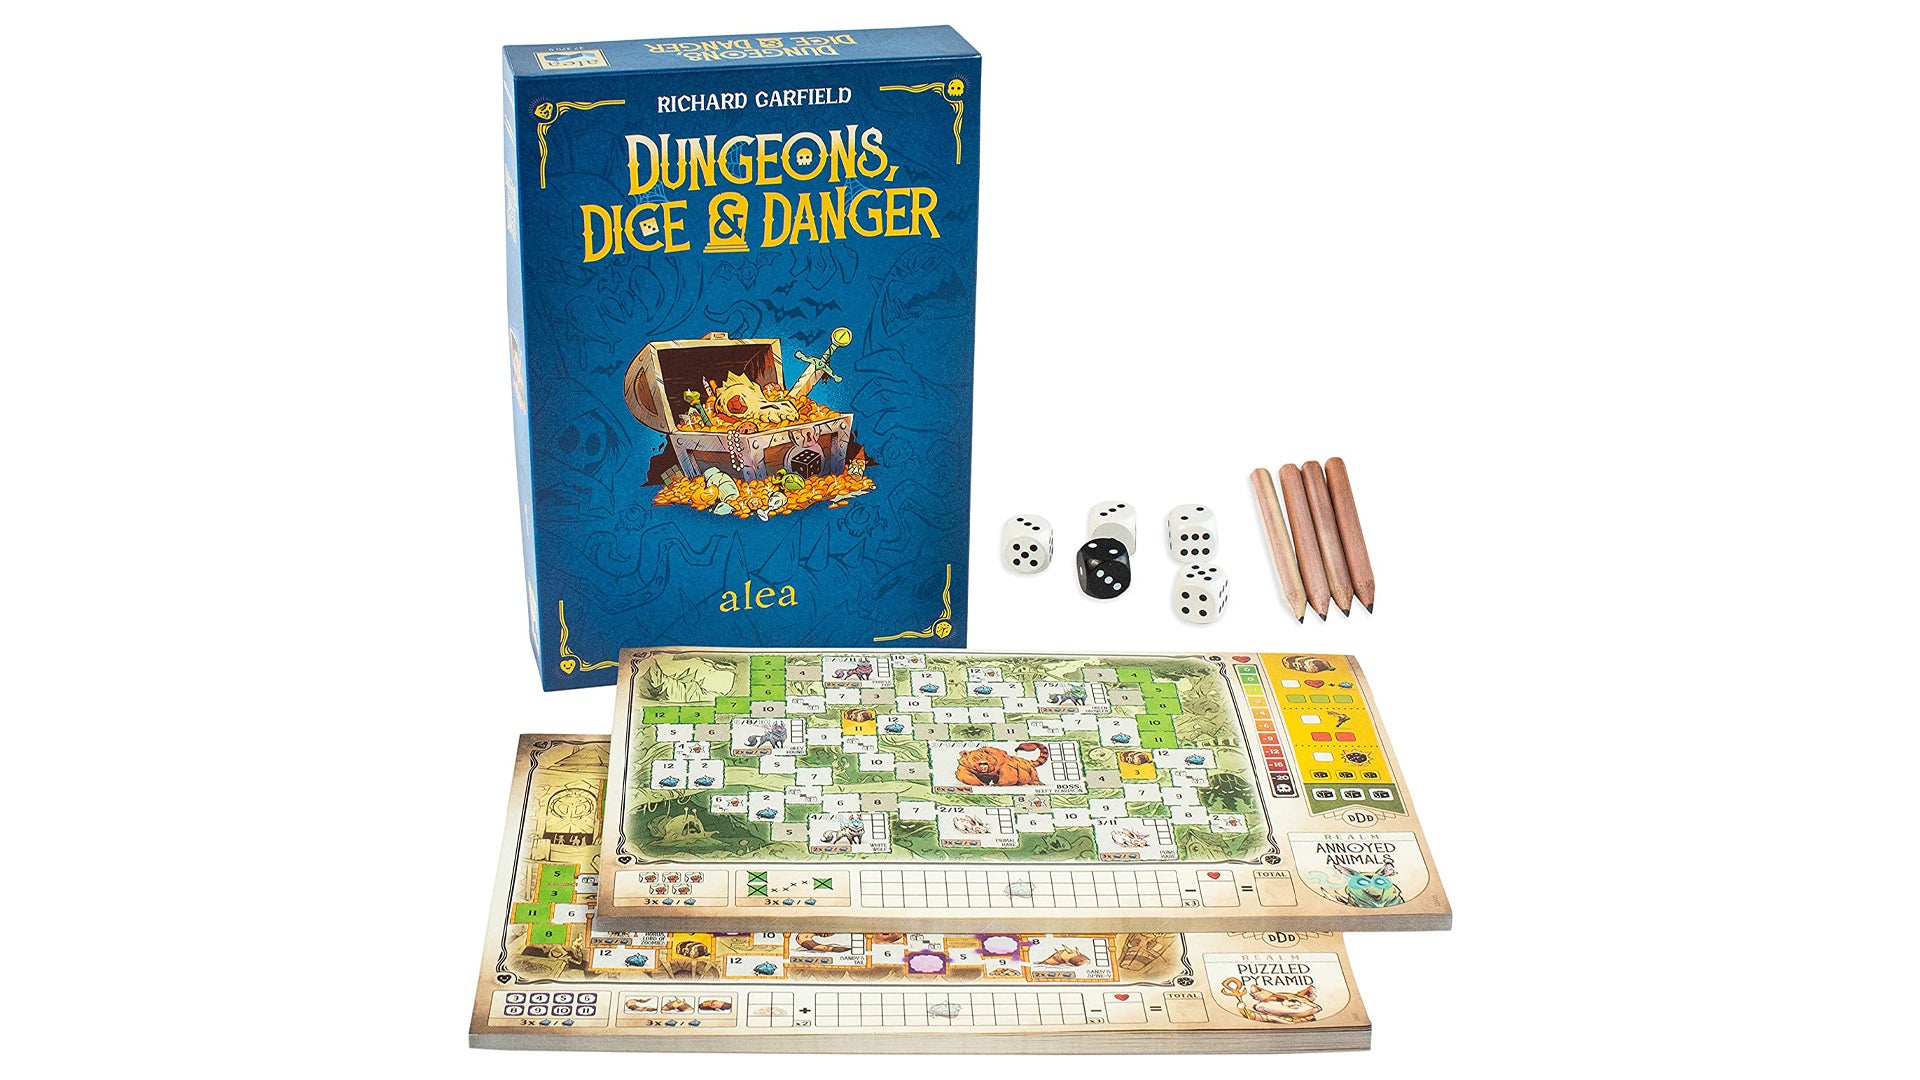 A layout image of Dungeons, Danger and Dice.